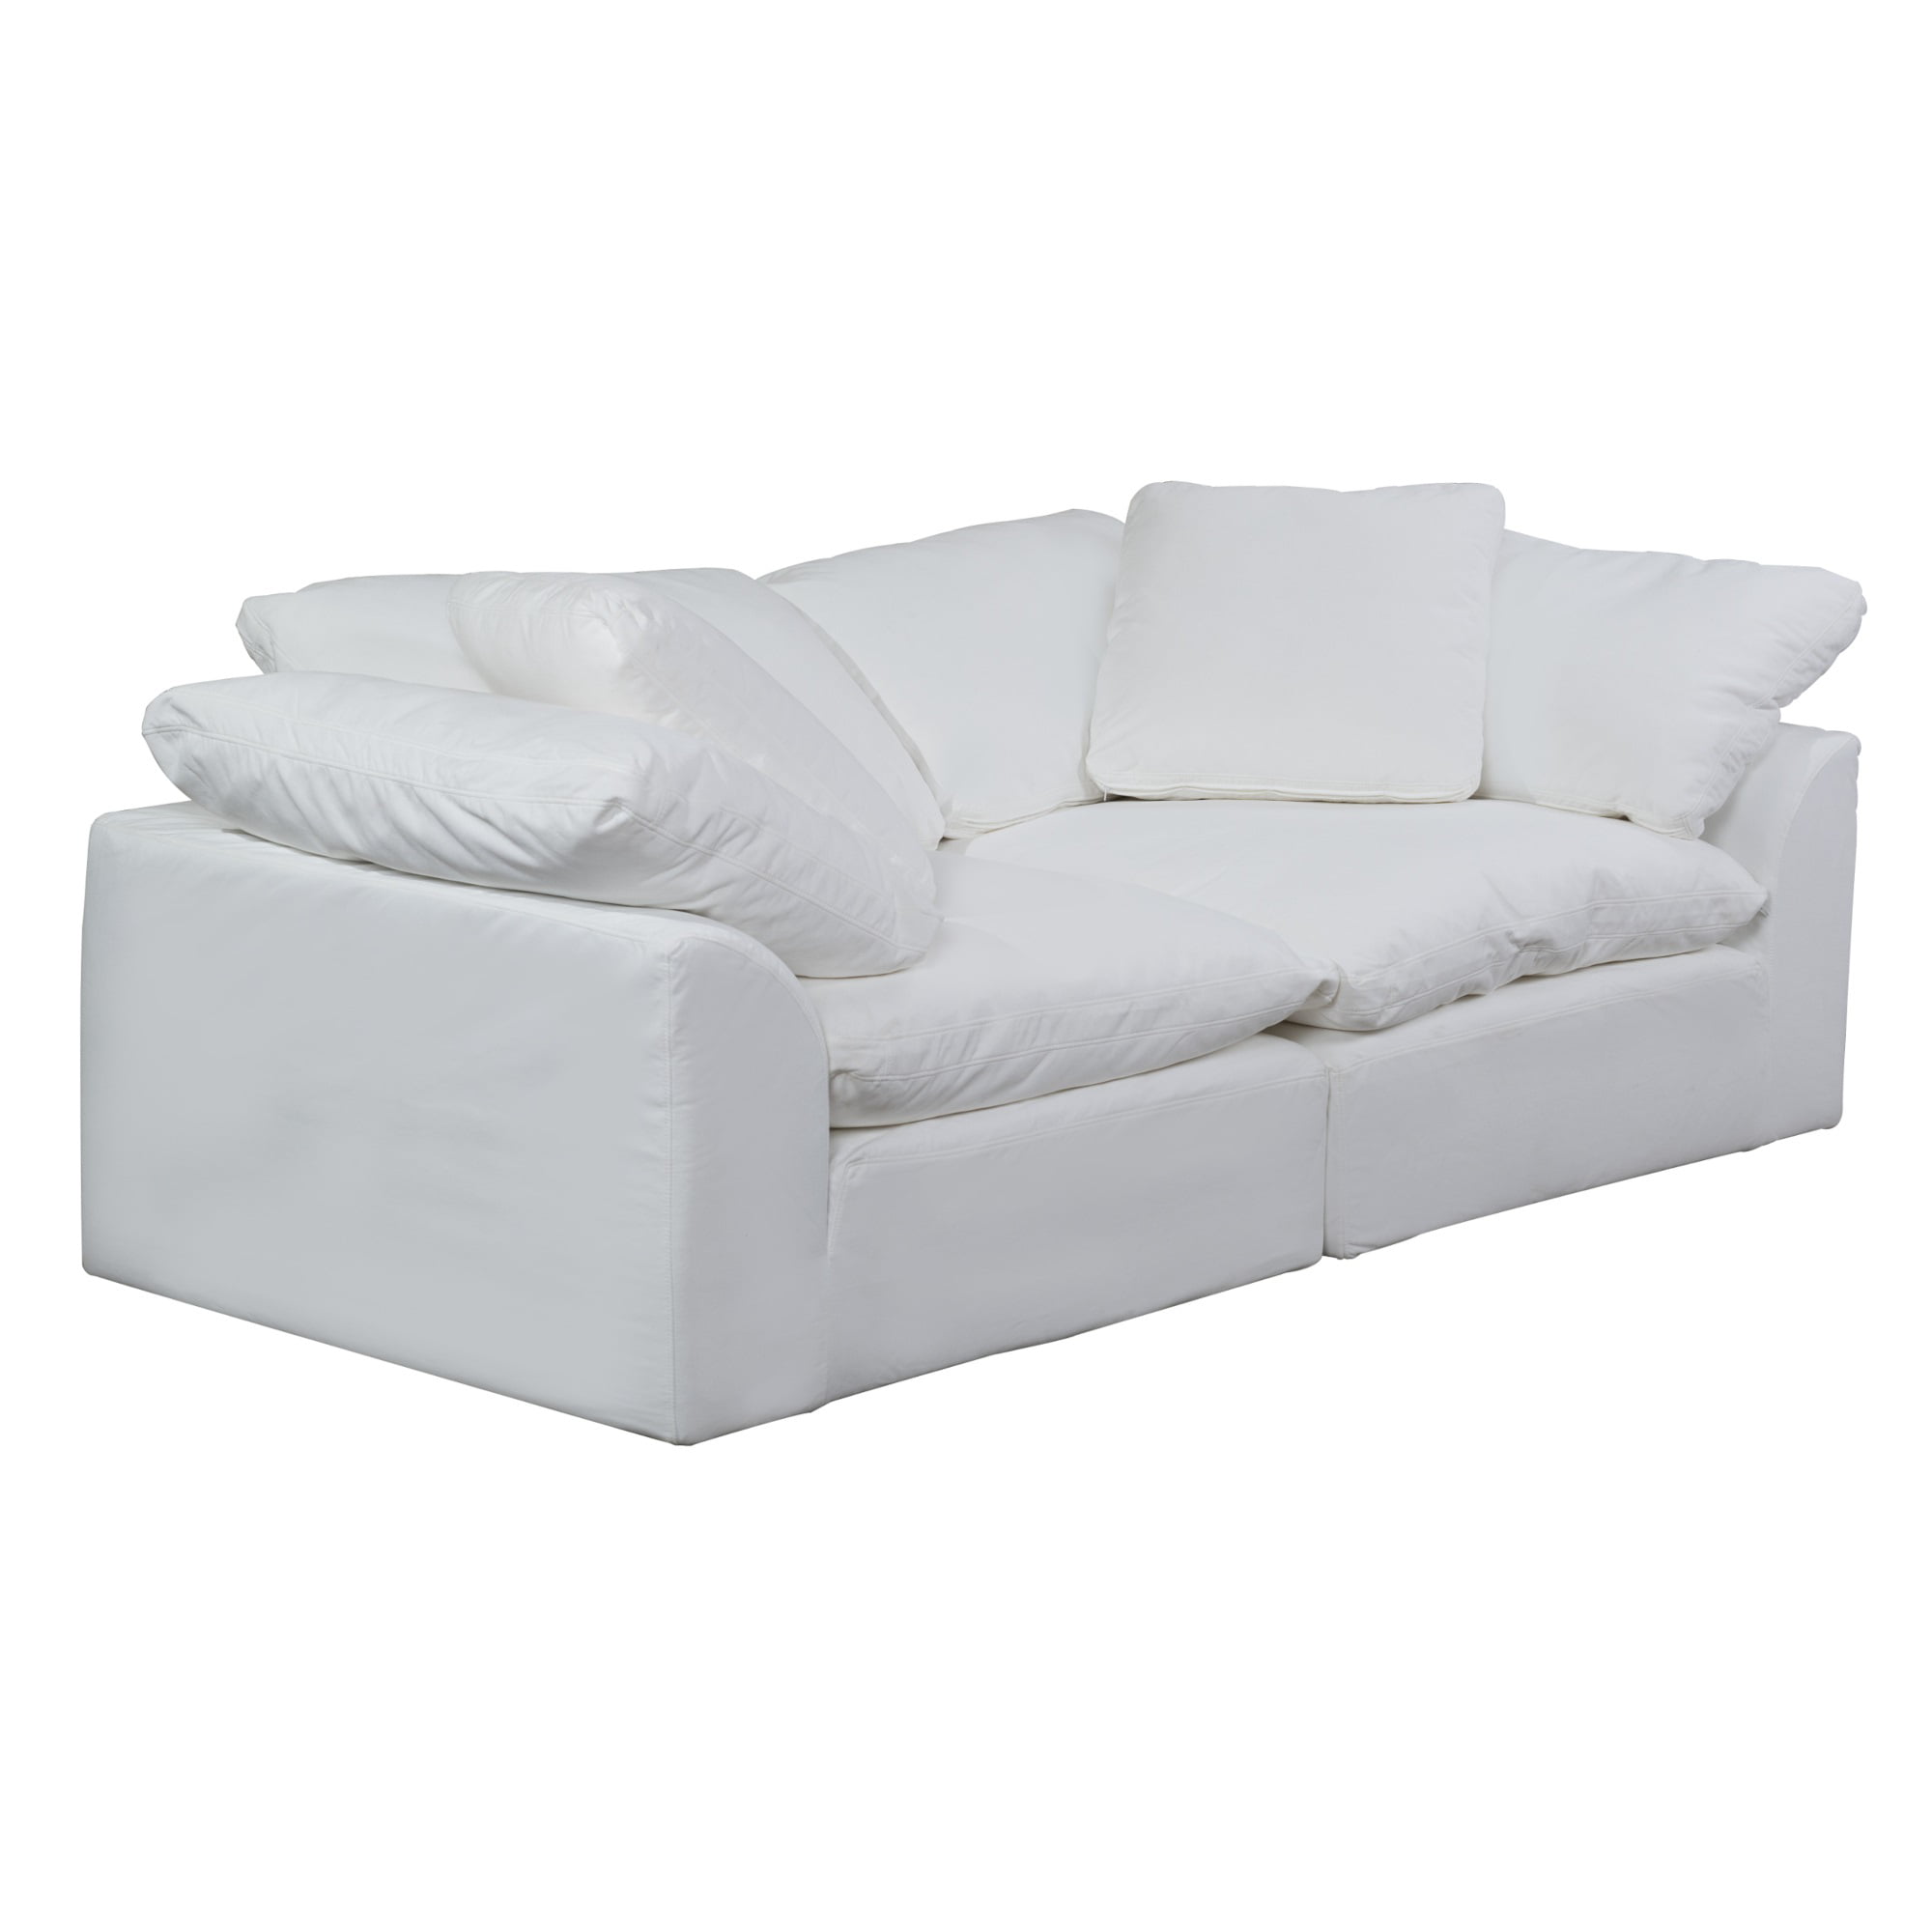 Details about   Sofa Cover Multifunction For Living Room Stain Resistant Home Couch Protector 